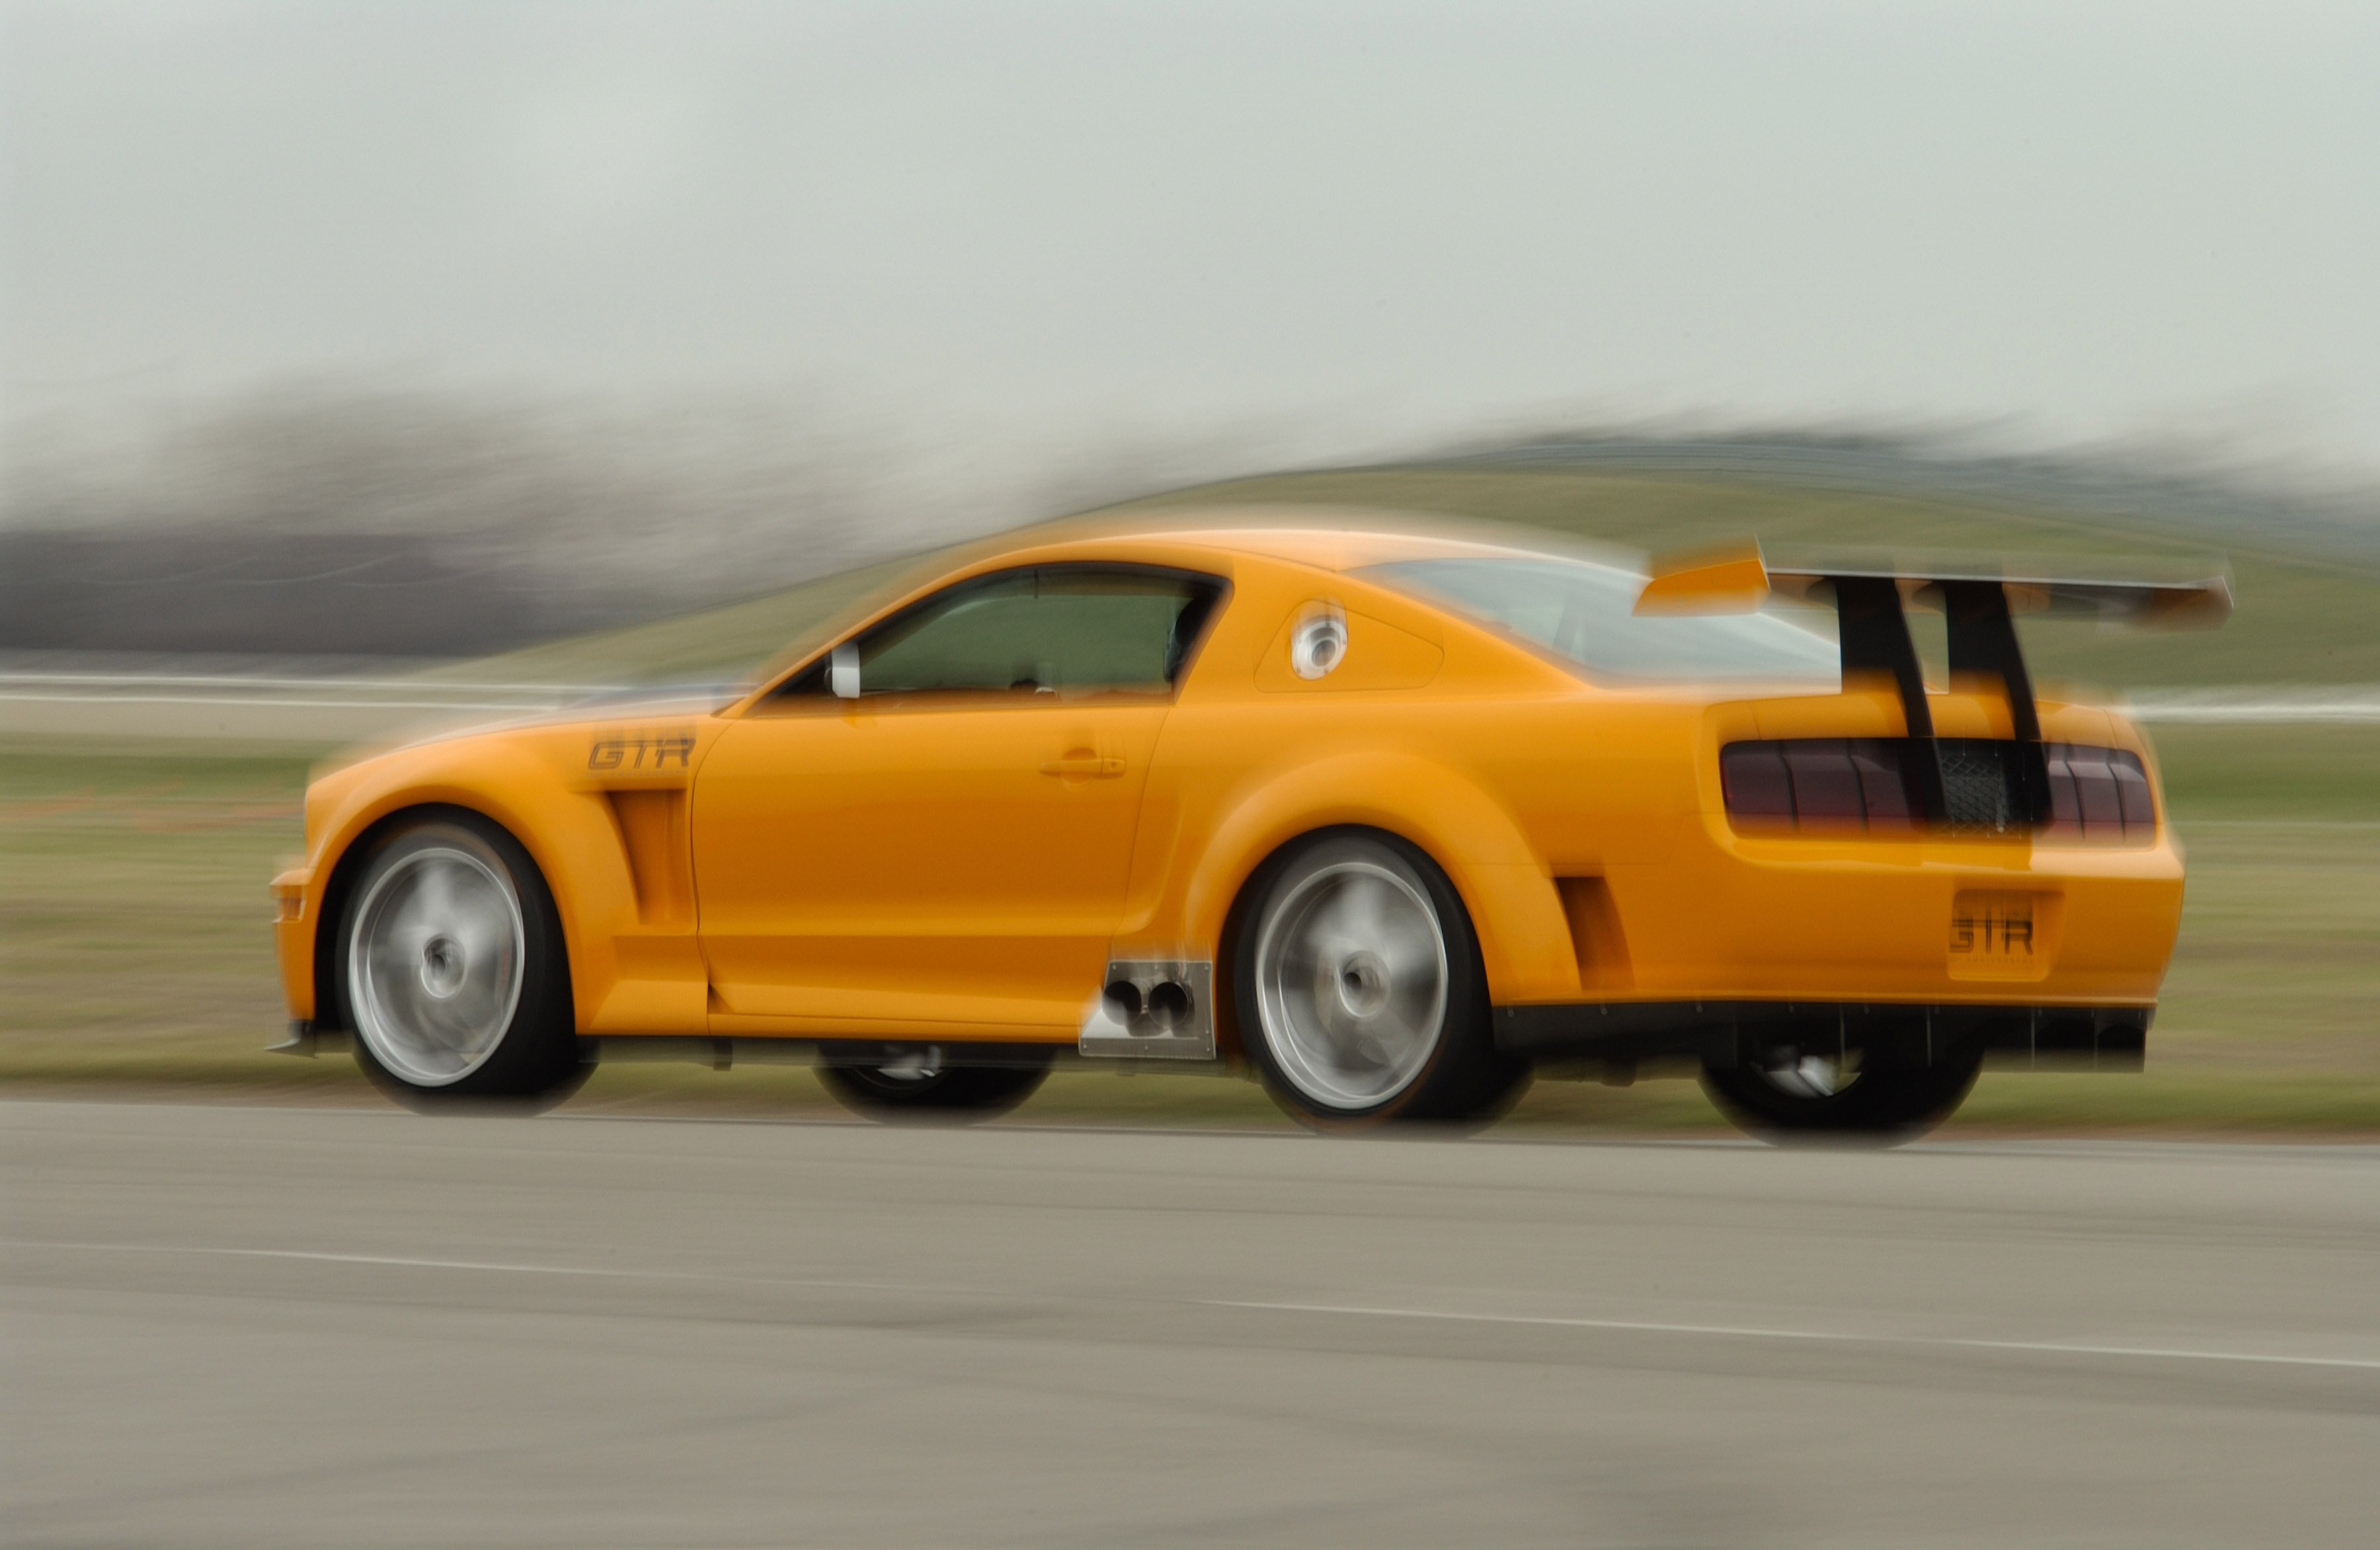 Ford Mustang Gt-r Backgrounds, Compatible - PC, Mobile, Gadgets| 3600x2345 px